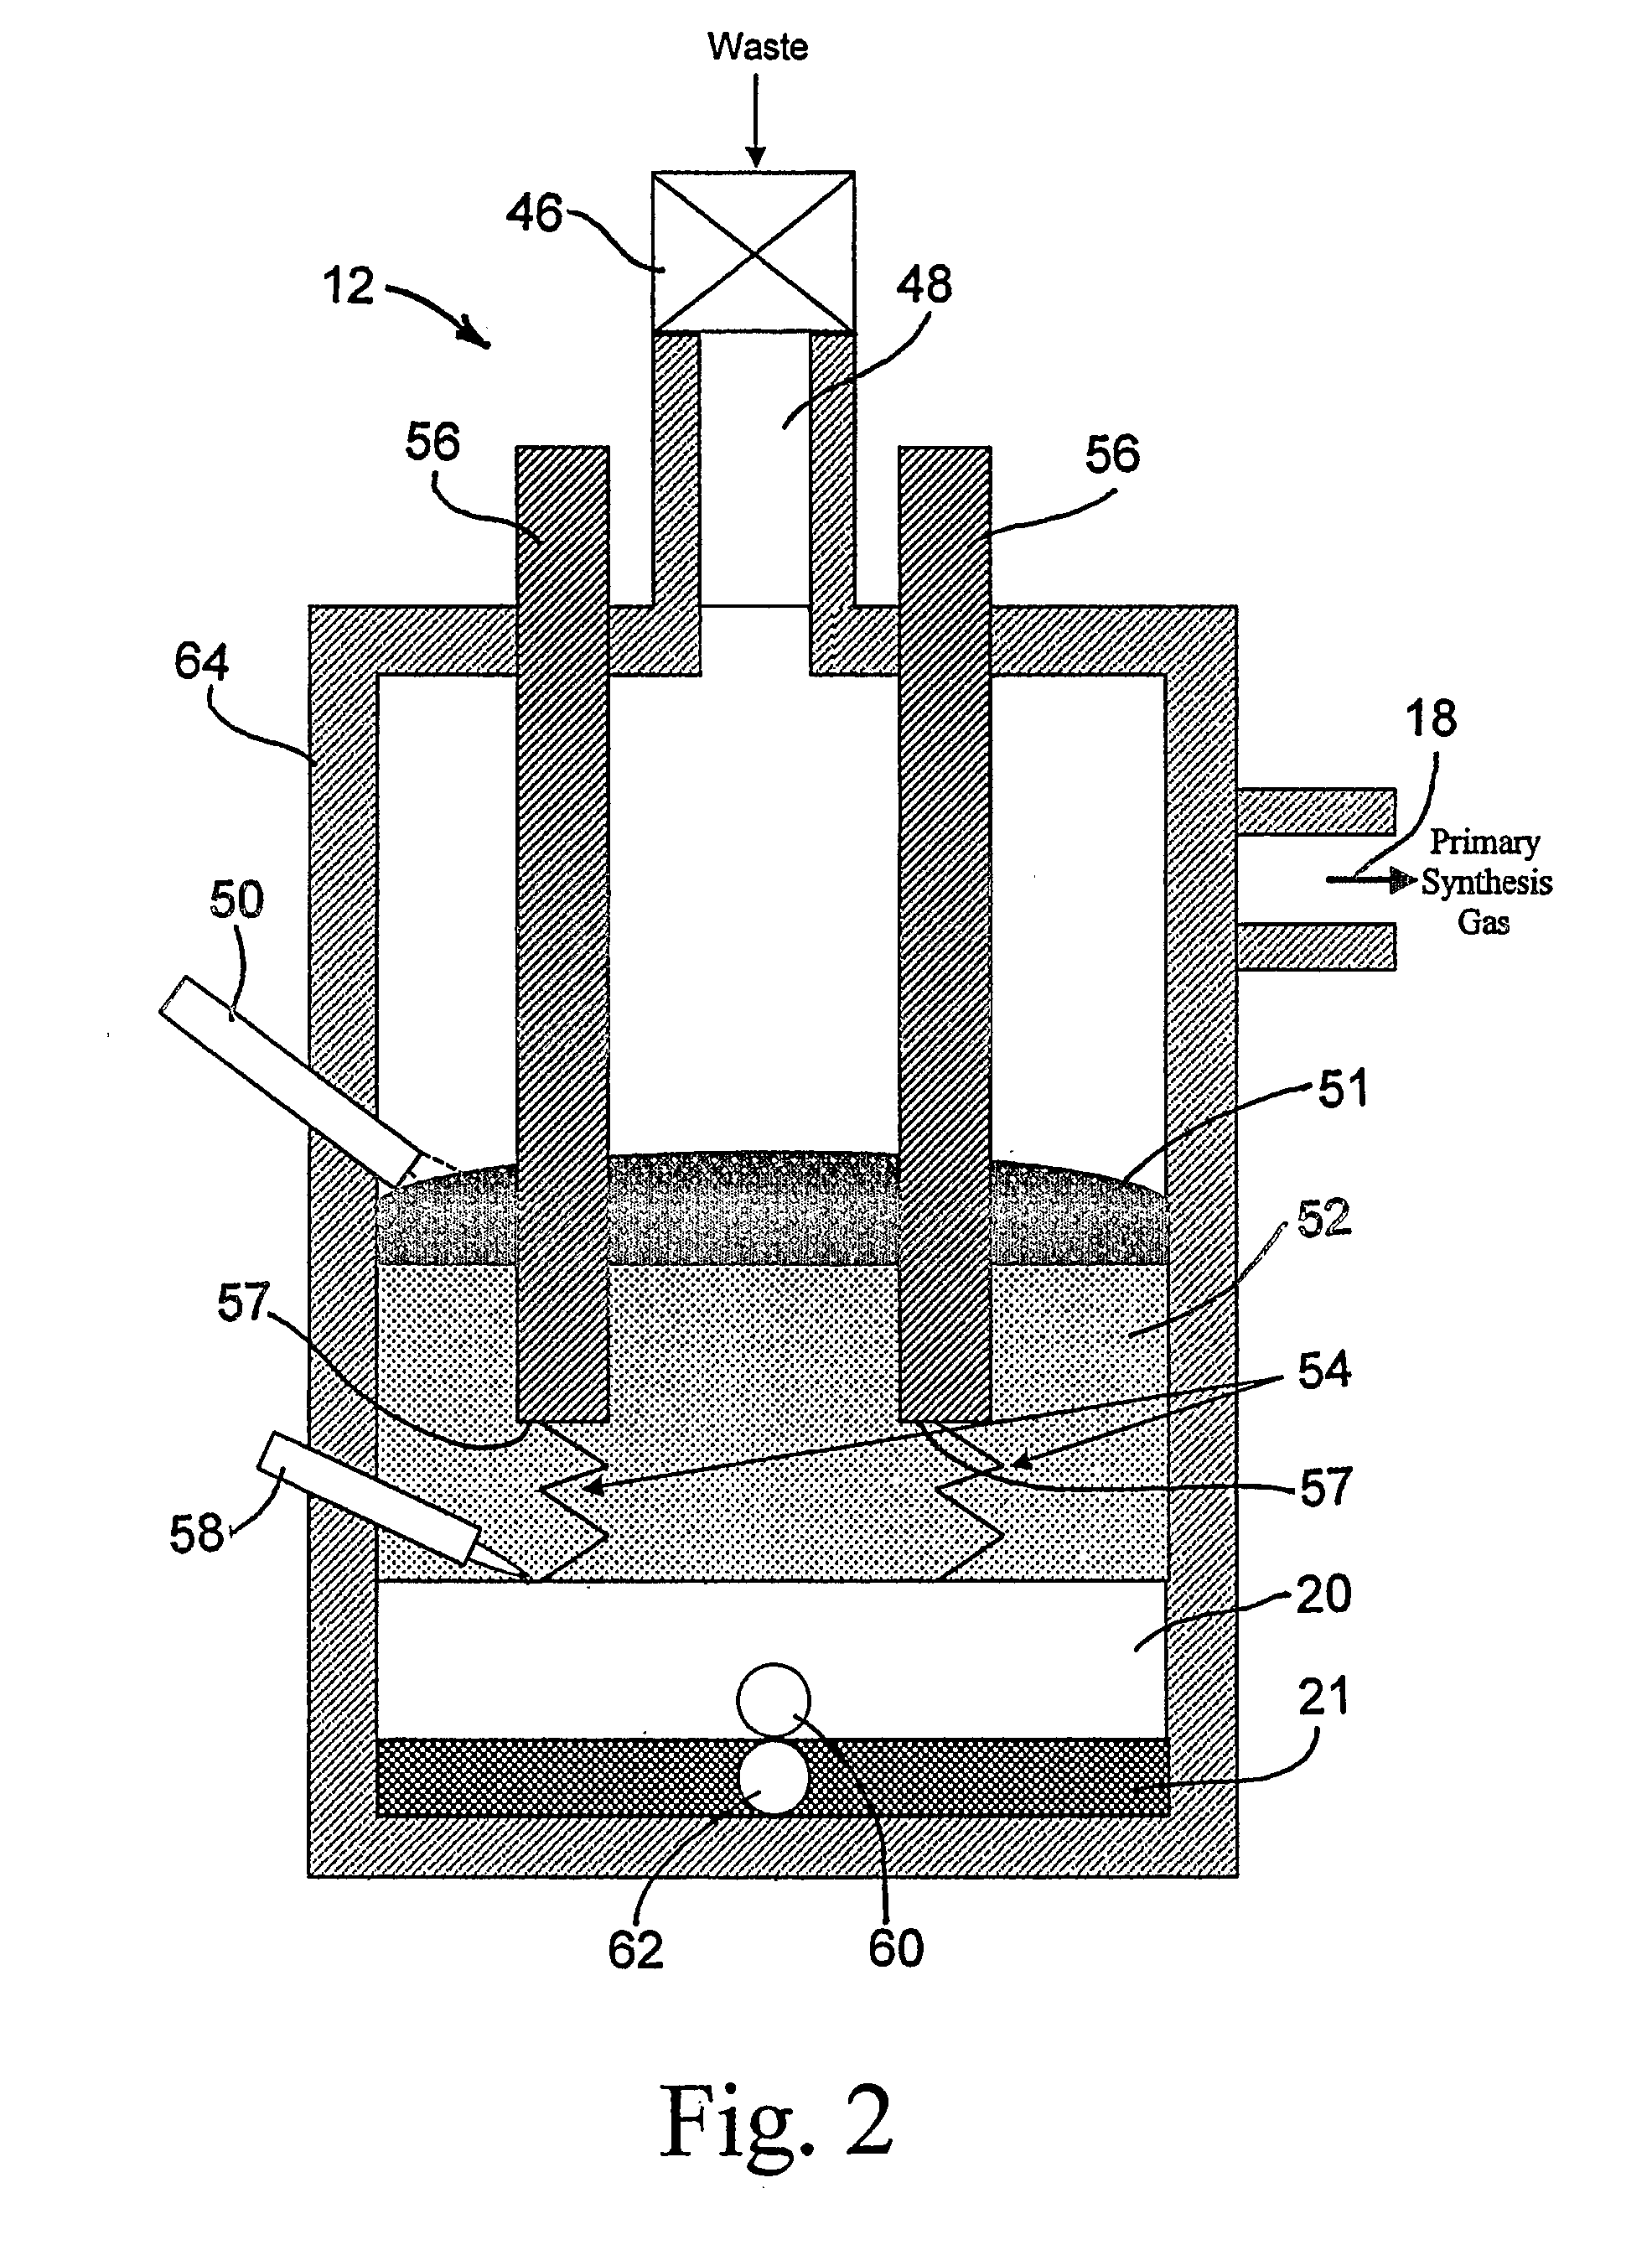 Two-stage plasma process for converting waste into fuel gas and apparatus therefor